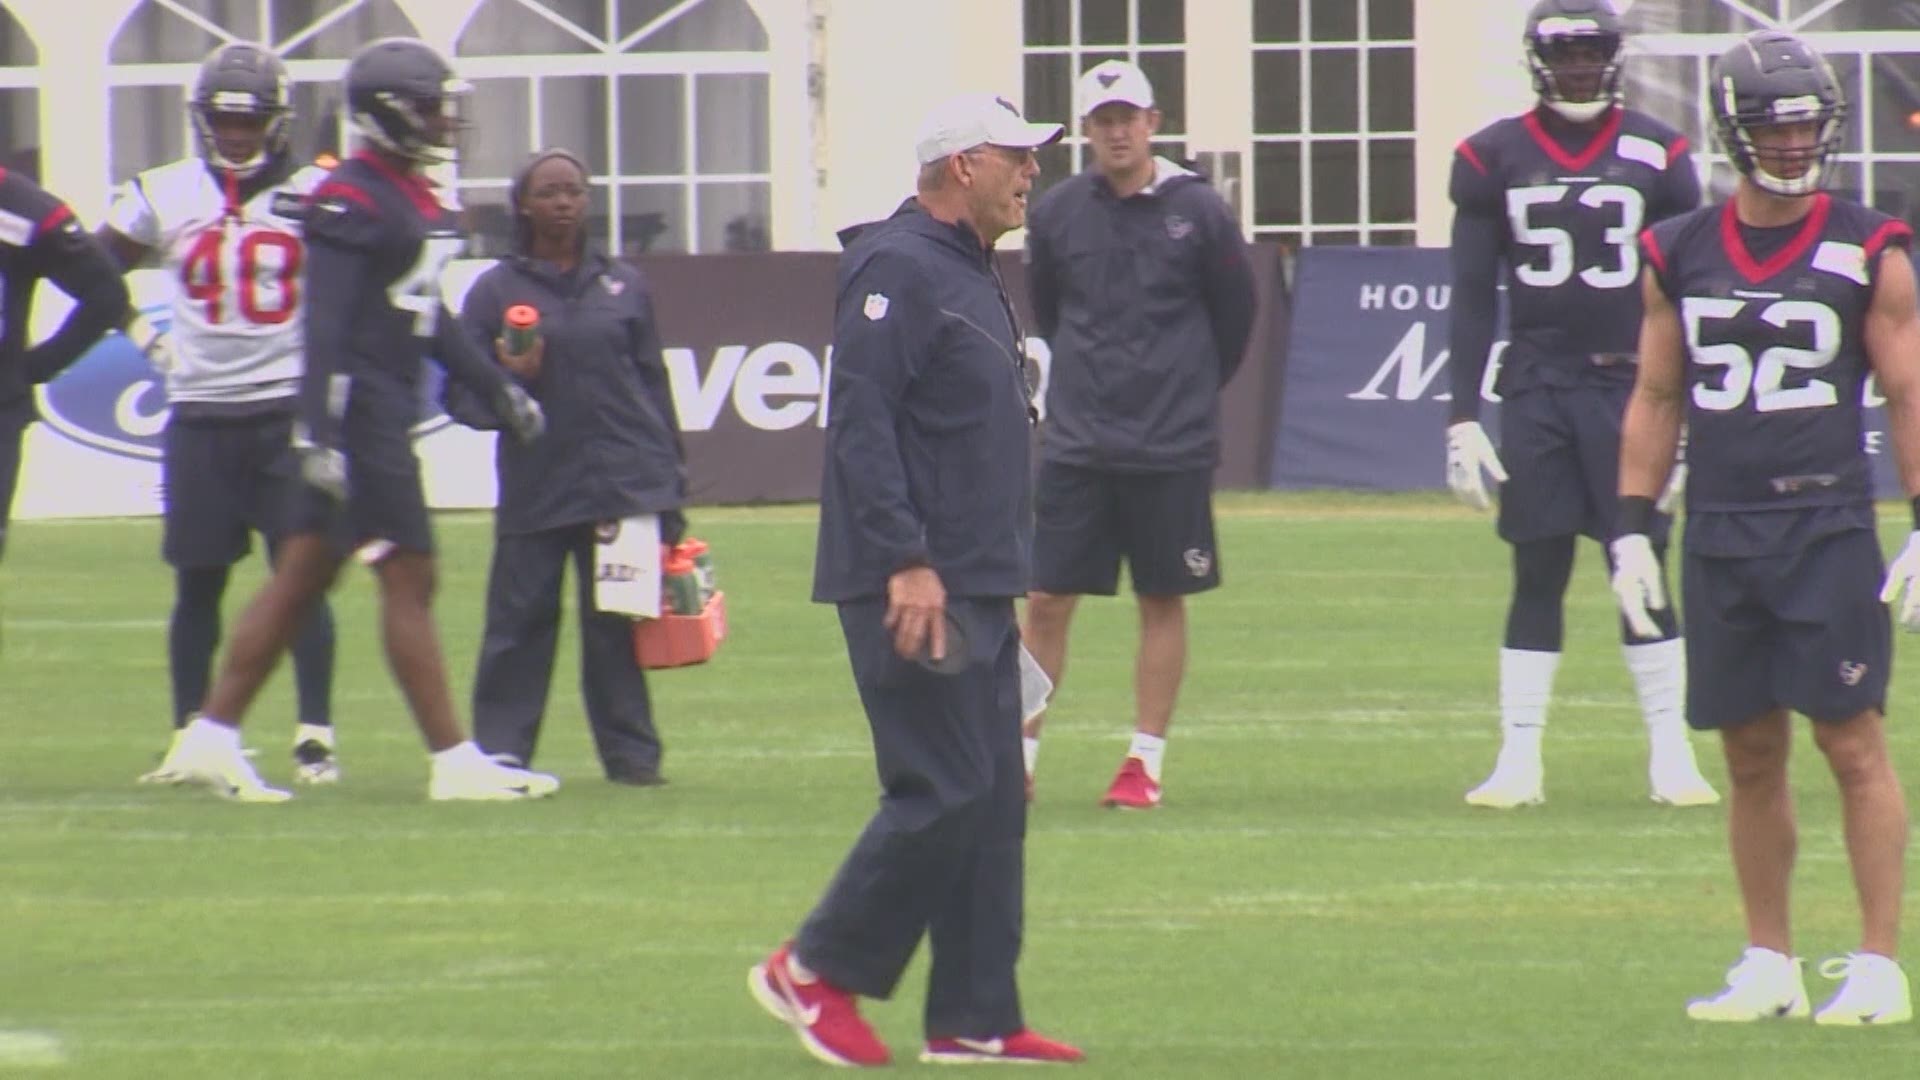 Despite rain, training camp went on for the Houston Texans at The Greenbrier Friday.